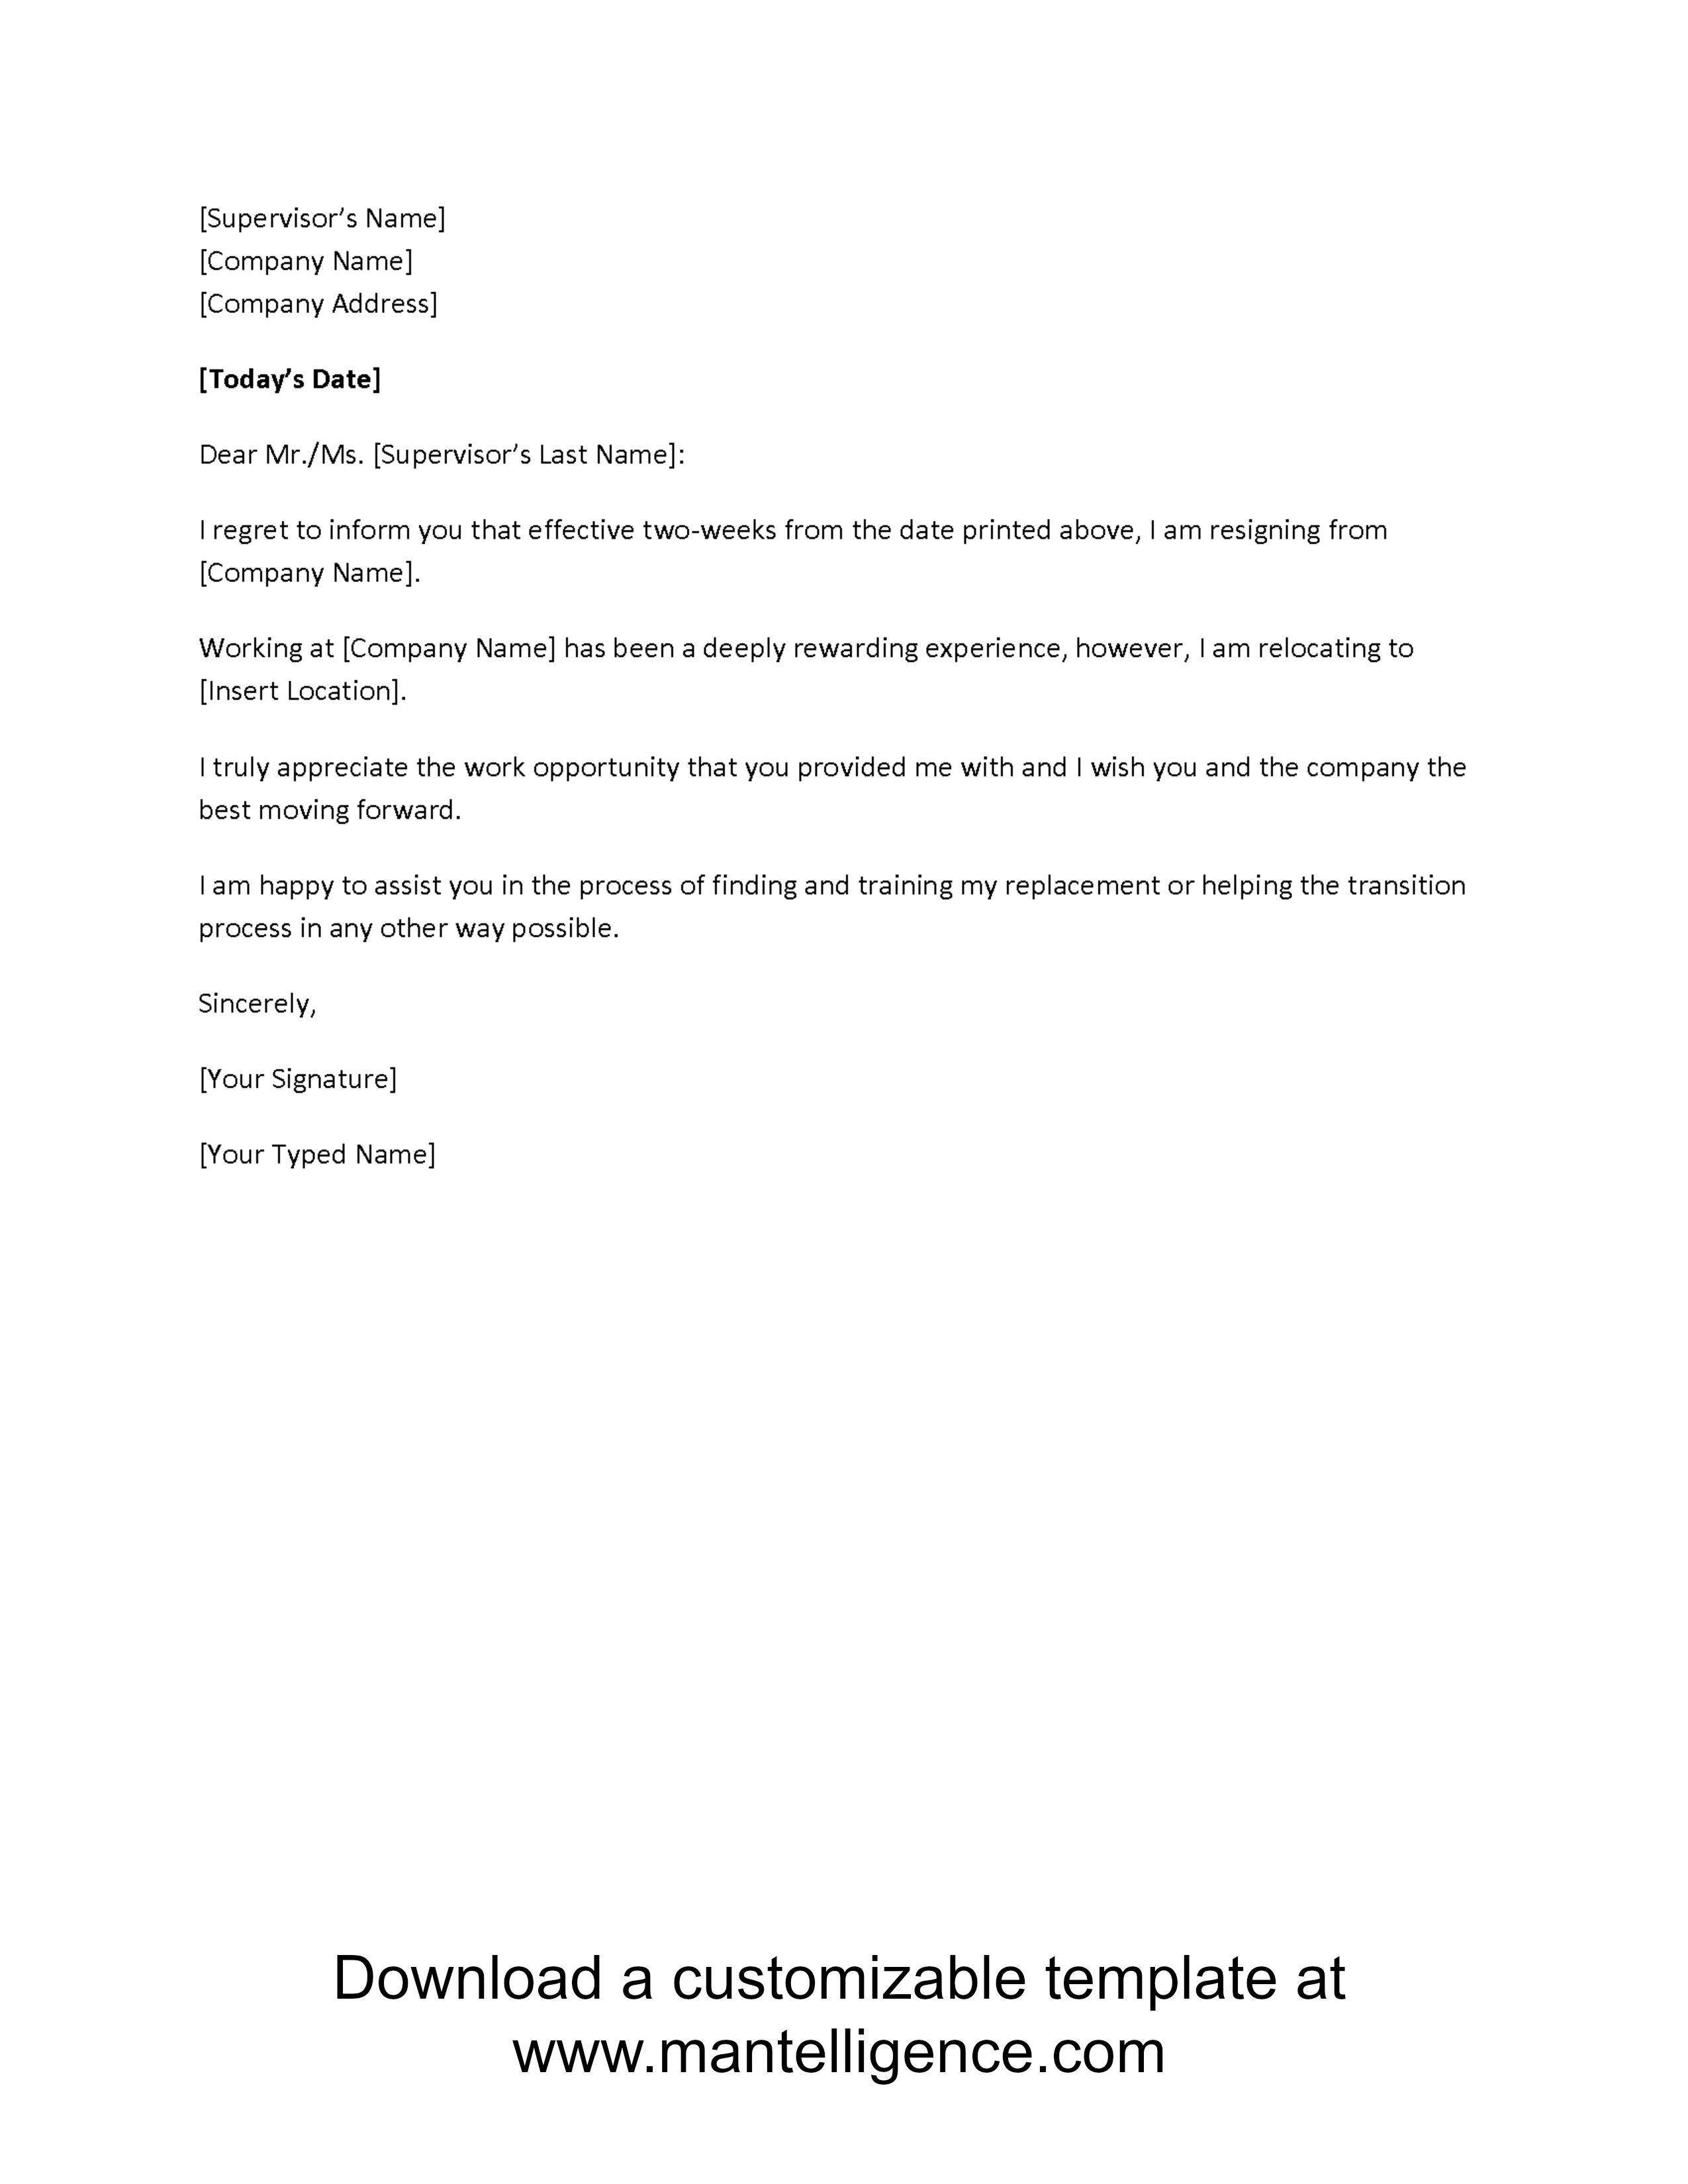 Workers Compensation Denial Letter Template - 3 Highly Professional Two Weeks Notice Letter Templates